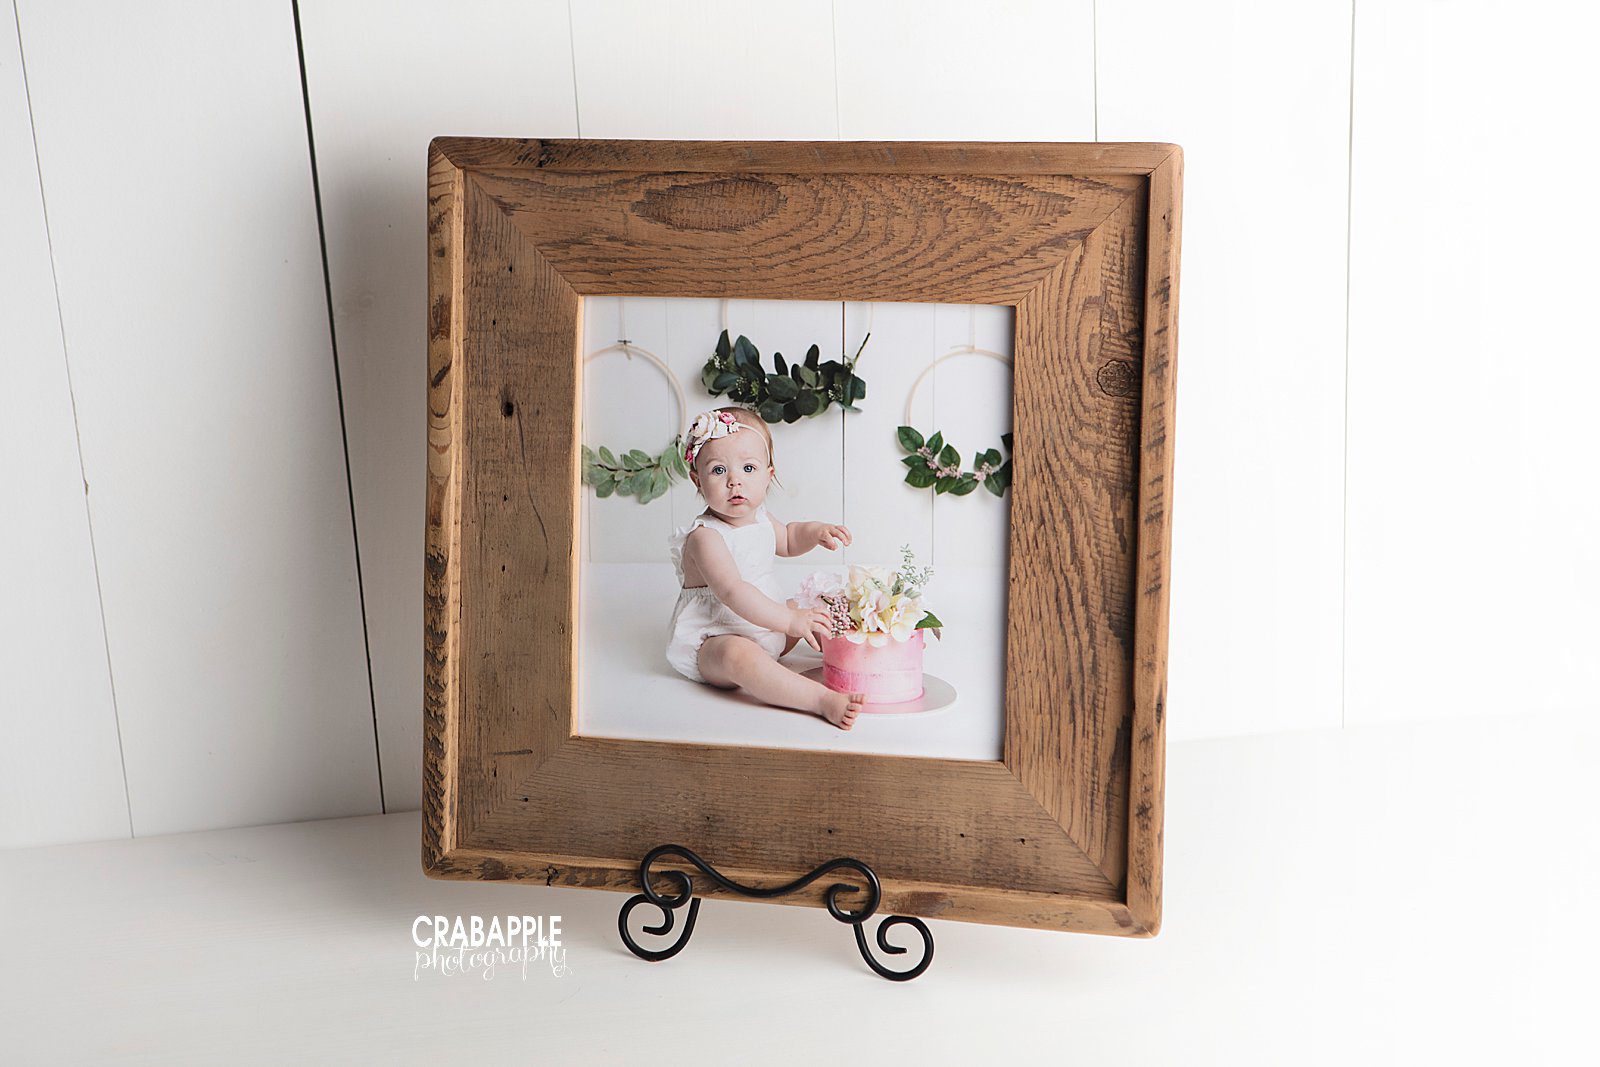 framed prints and products